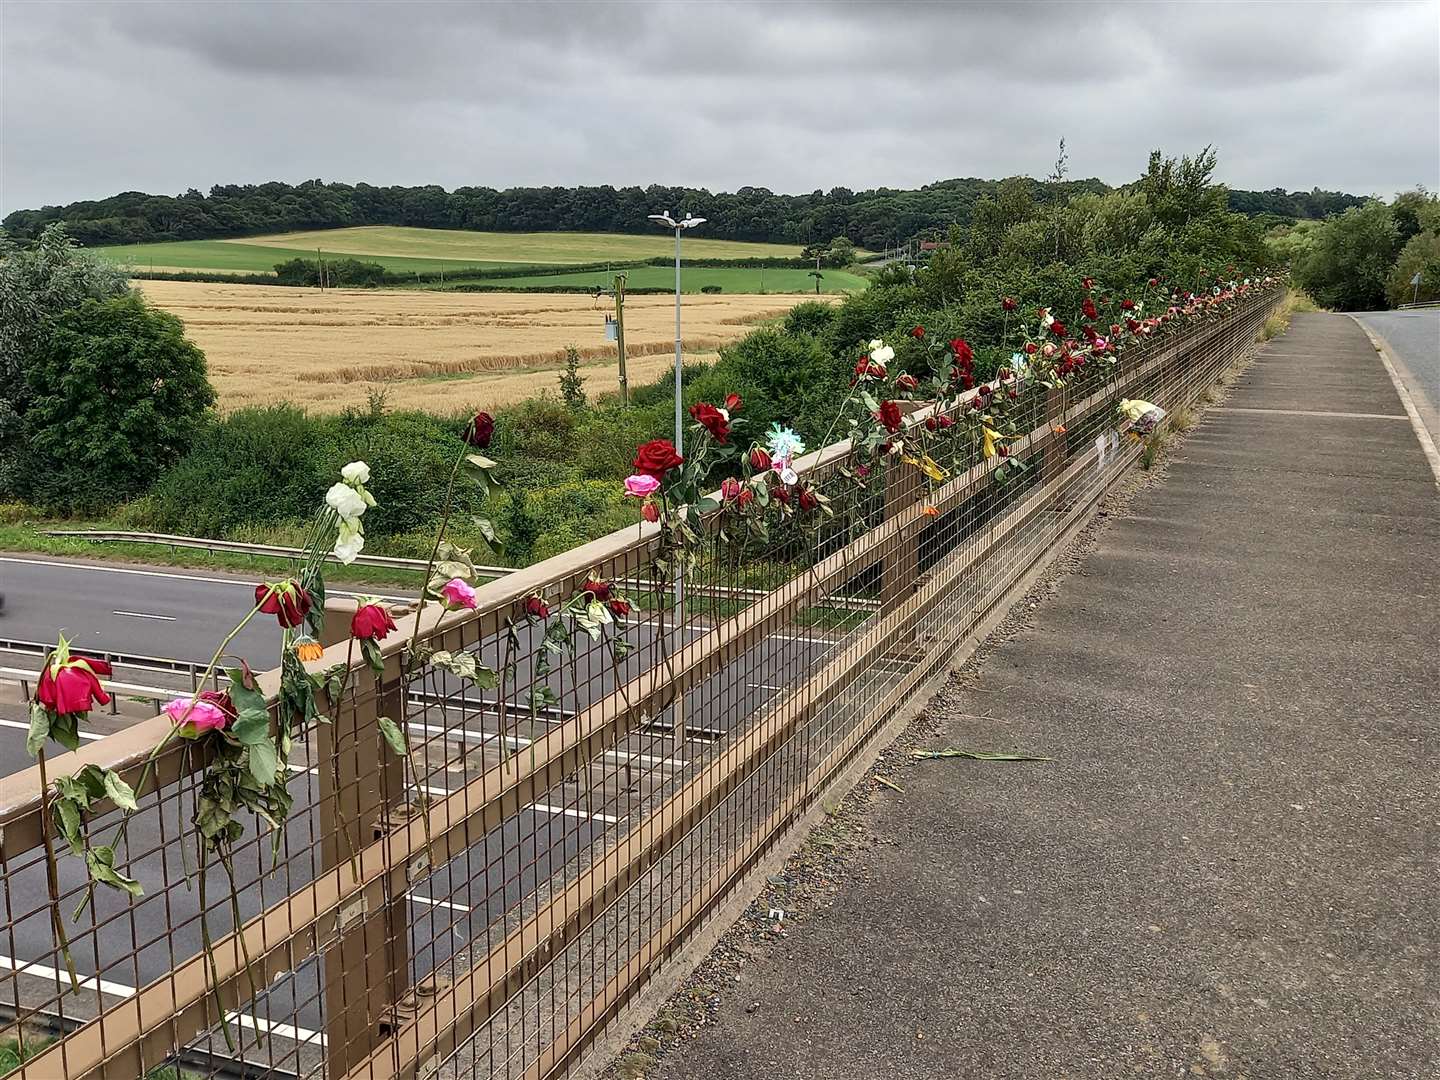 Individual flowers have been attached to the railings on both sides of the bridge